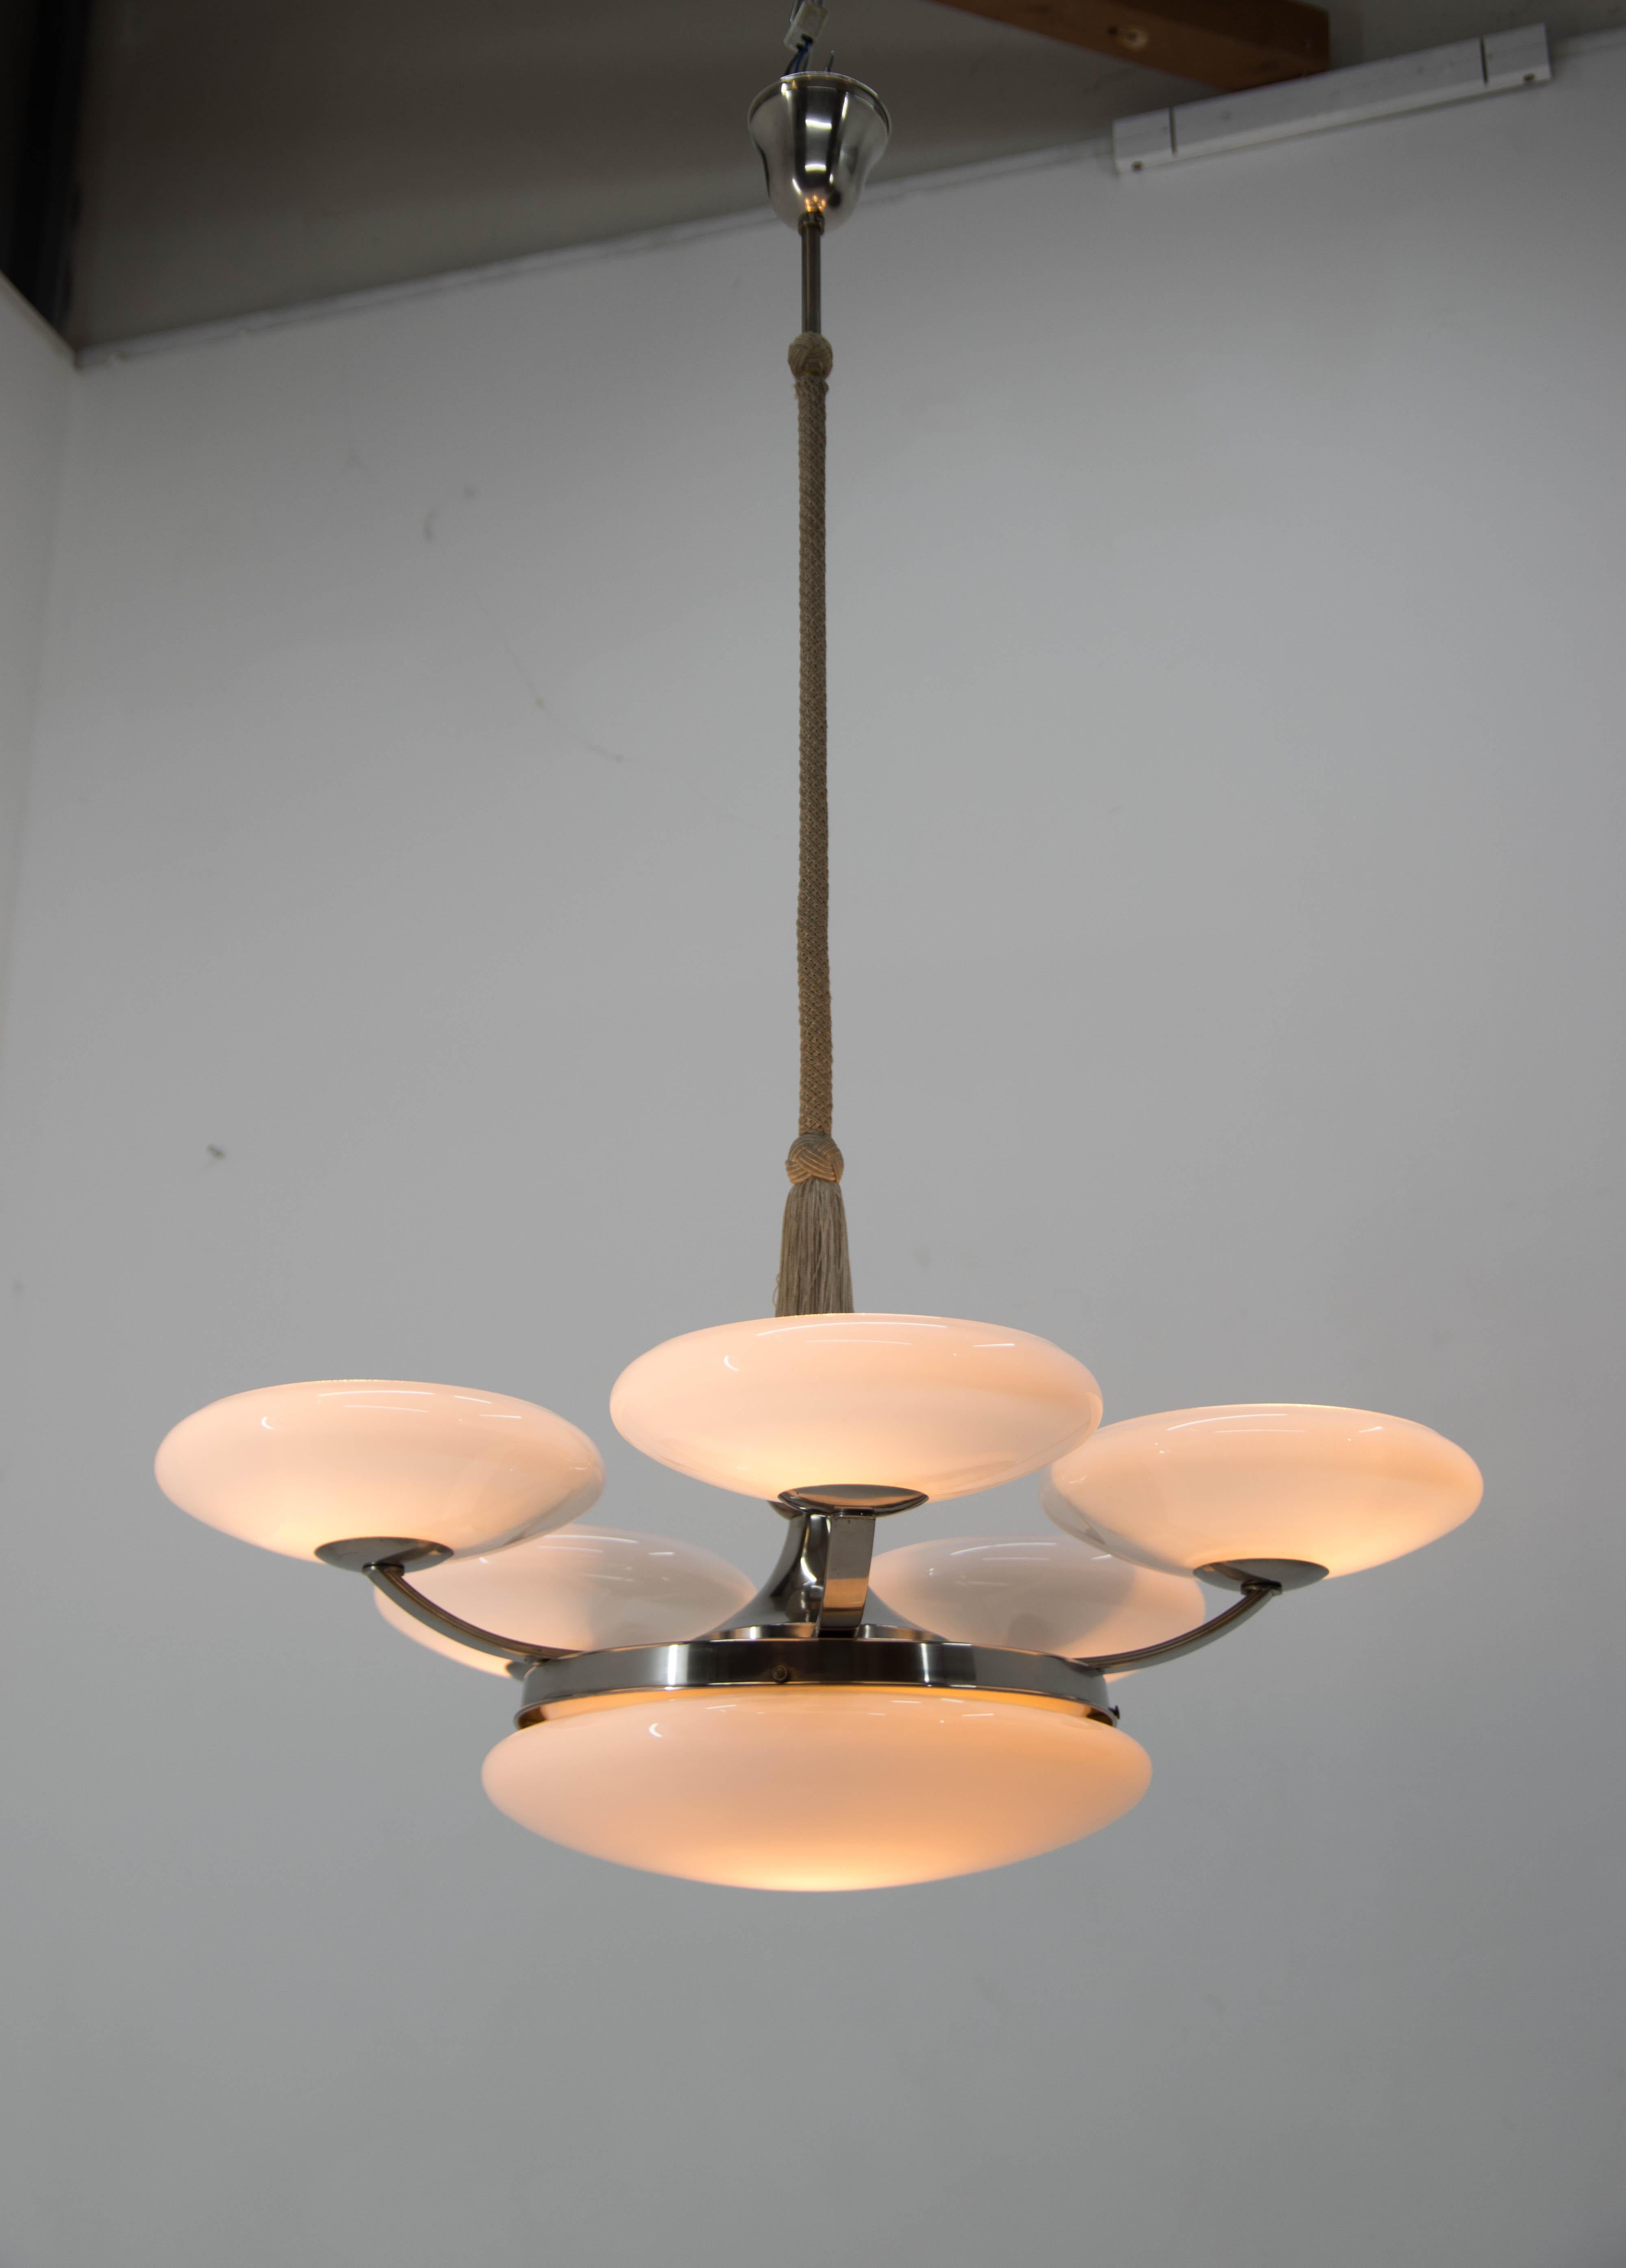 Restored: nickel polished, new blown opaline glass shades
Height could be shortened on request.
Two Items available, one without a textile rod cover.
Rewired: two separate circuits 1+5x60W, E 25-E27 bulbs
US wiring compatible.